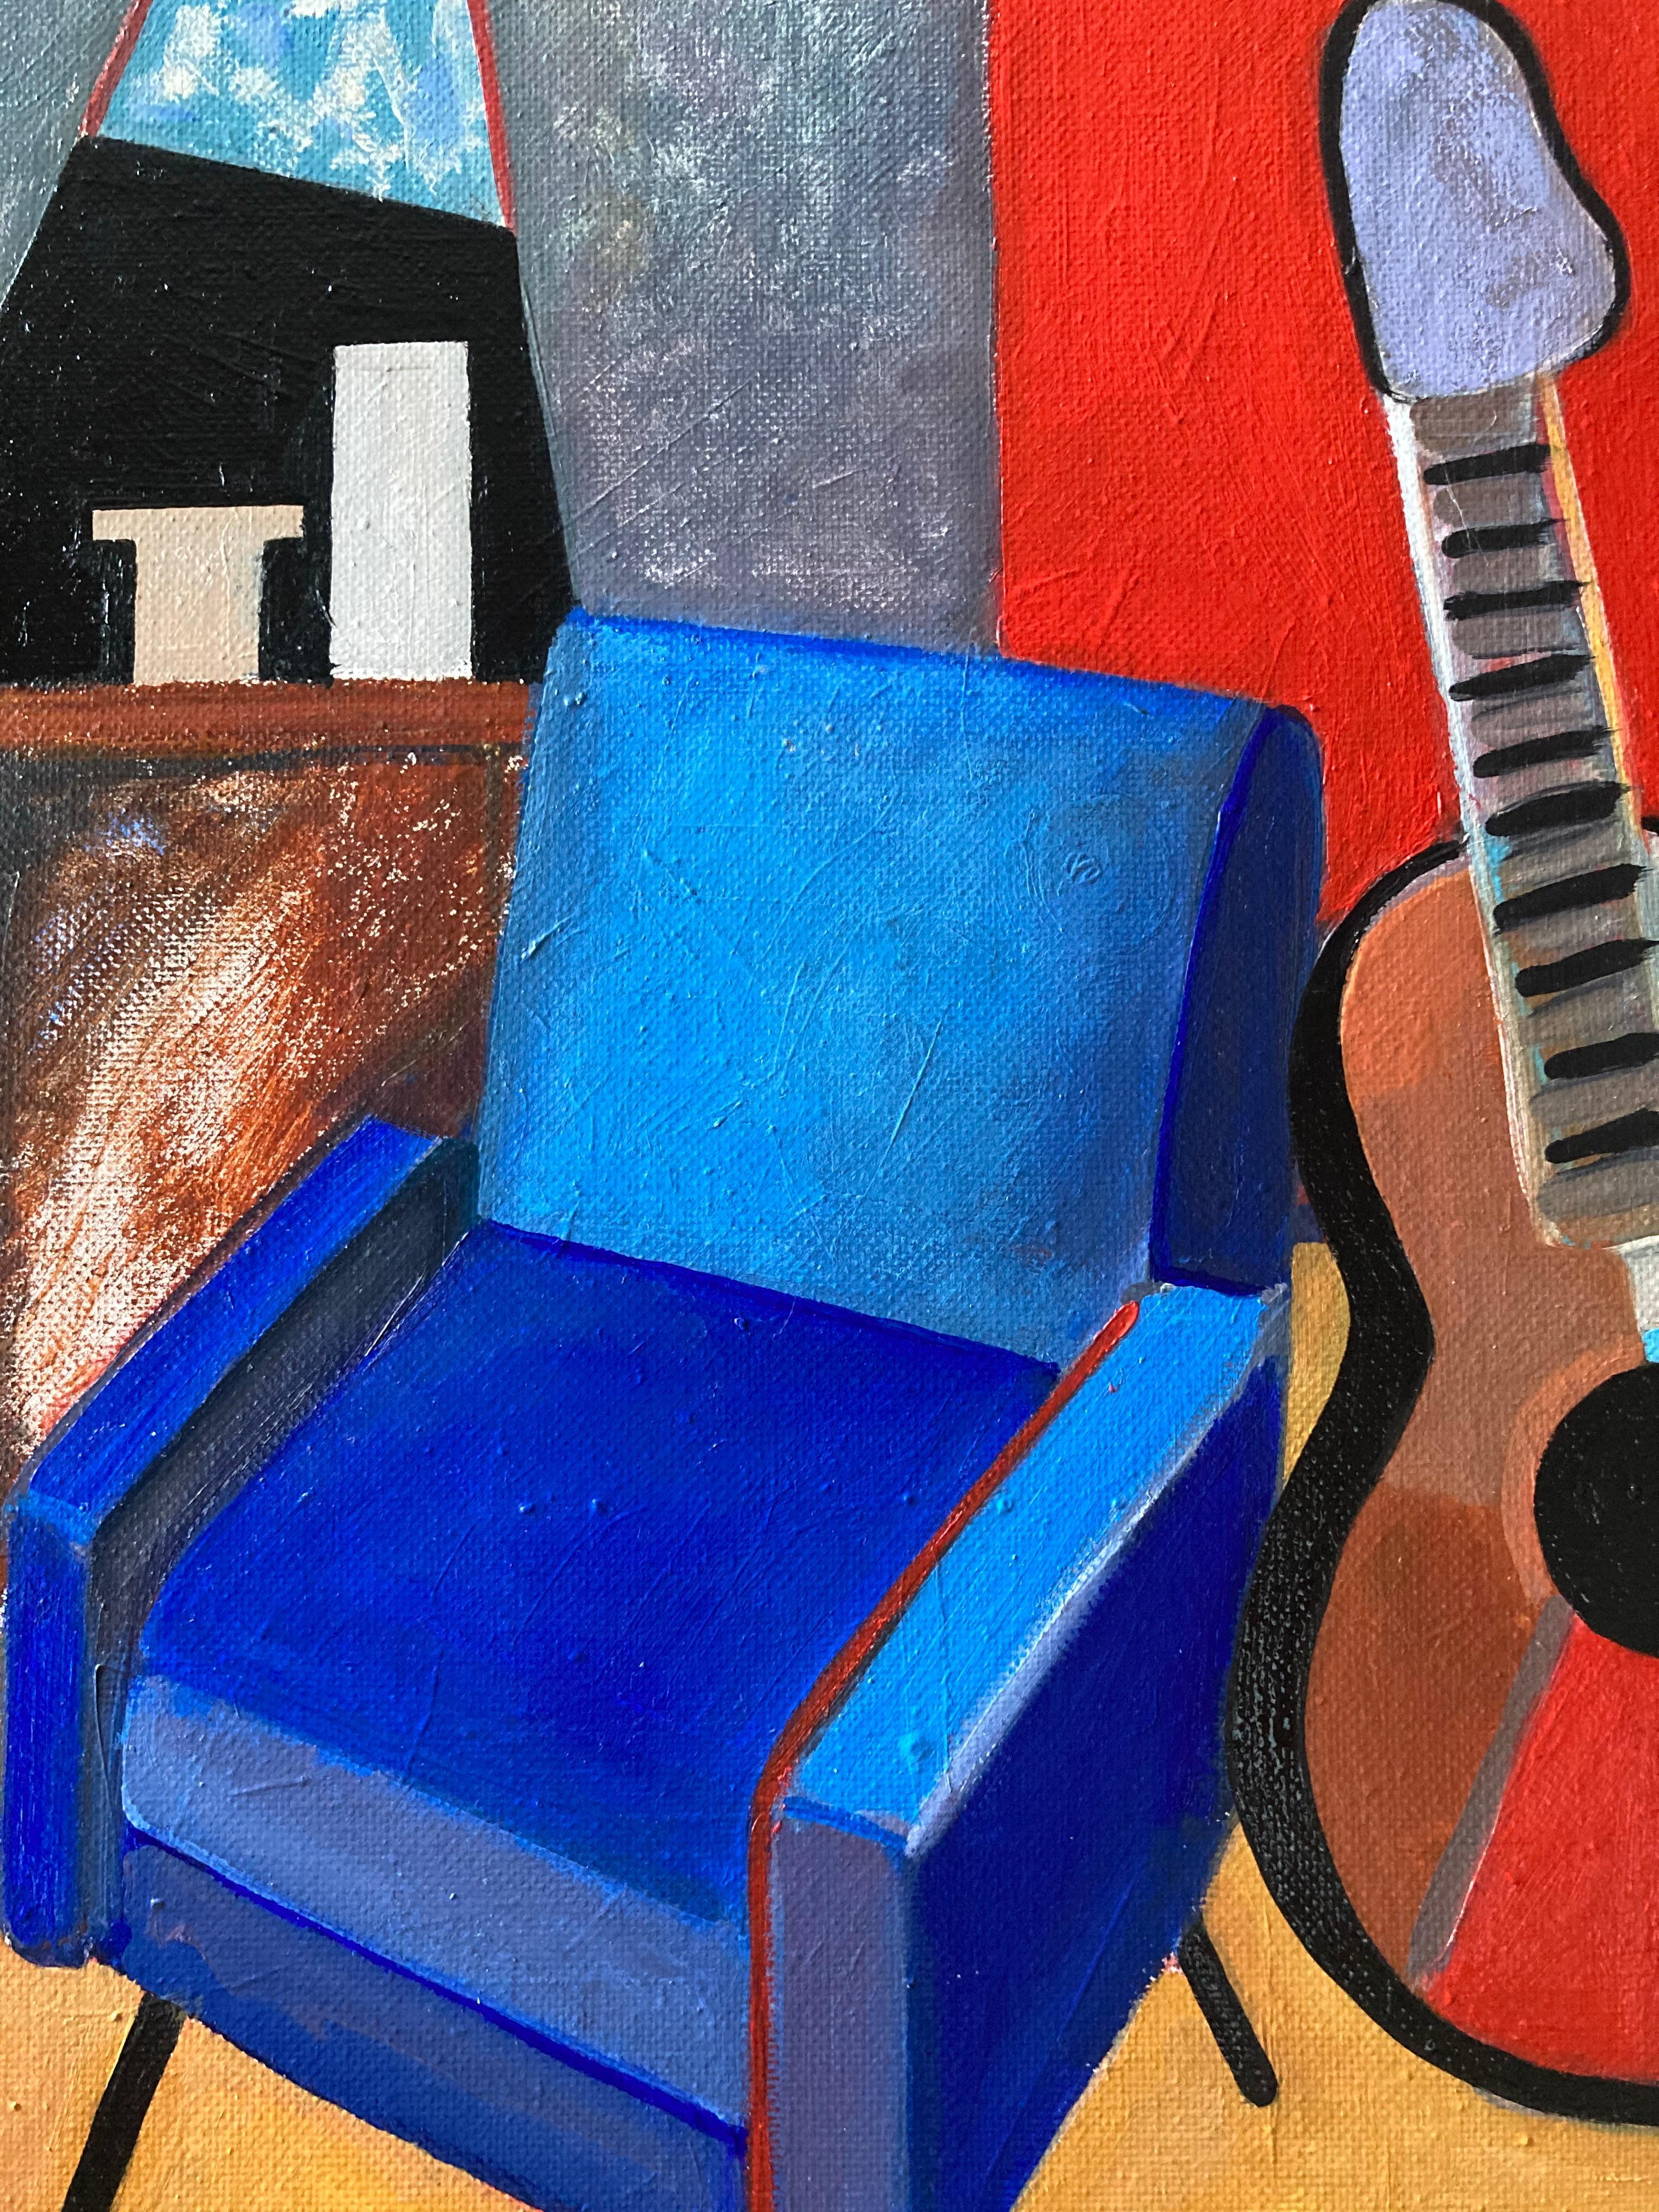 Interior with blue armchair and guitar - Modern Painting by Olga Afanasiadi